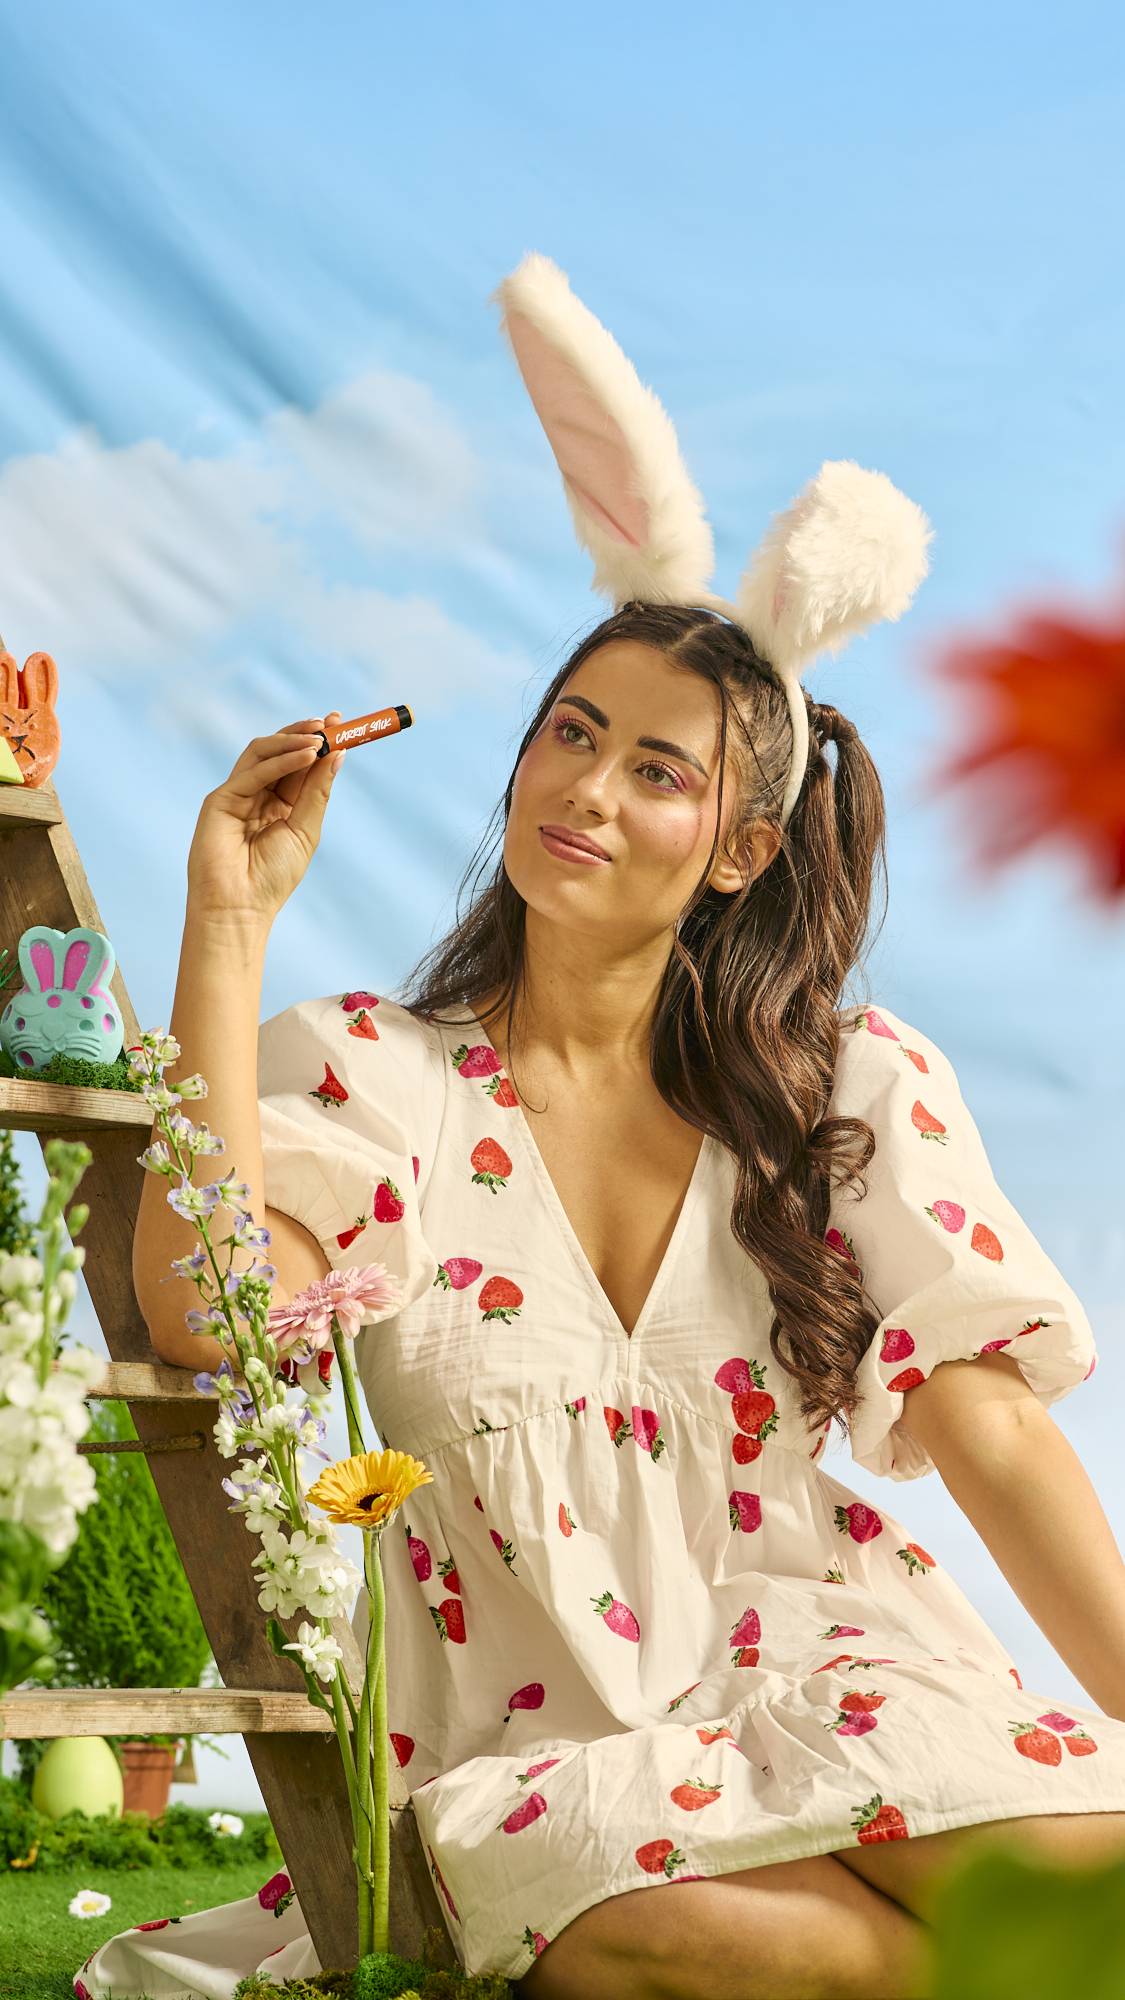 The model is sitting in a white dress with strawberry decoration and they are wearing a bunny ear headband as they hold the Carrot Stick lip balm. 